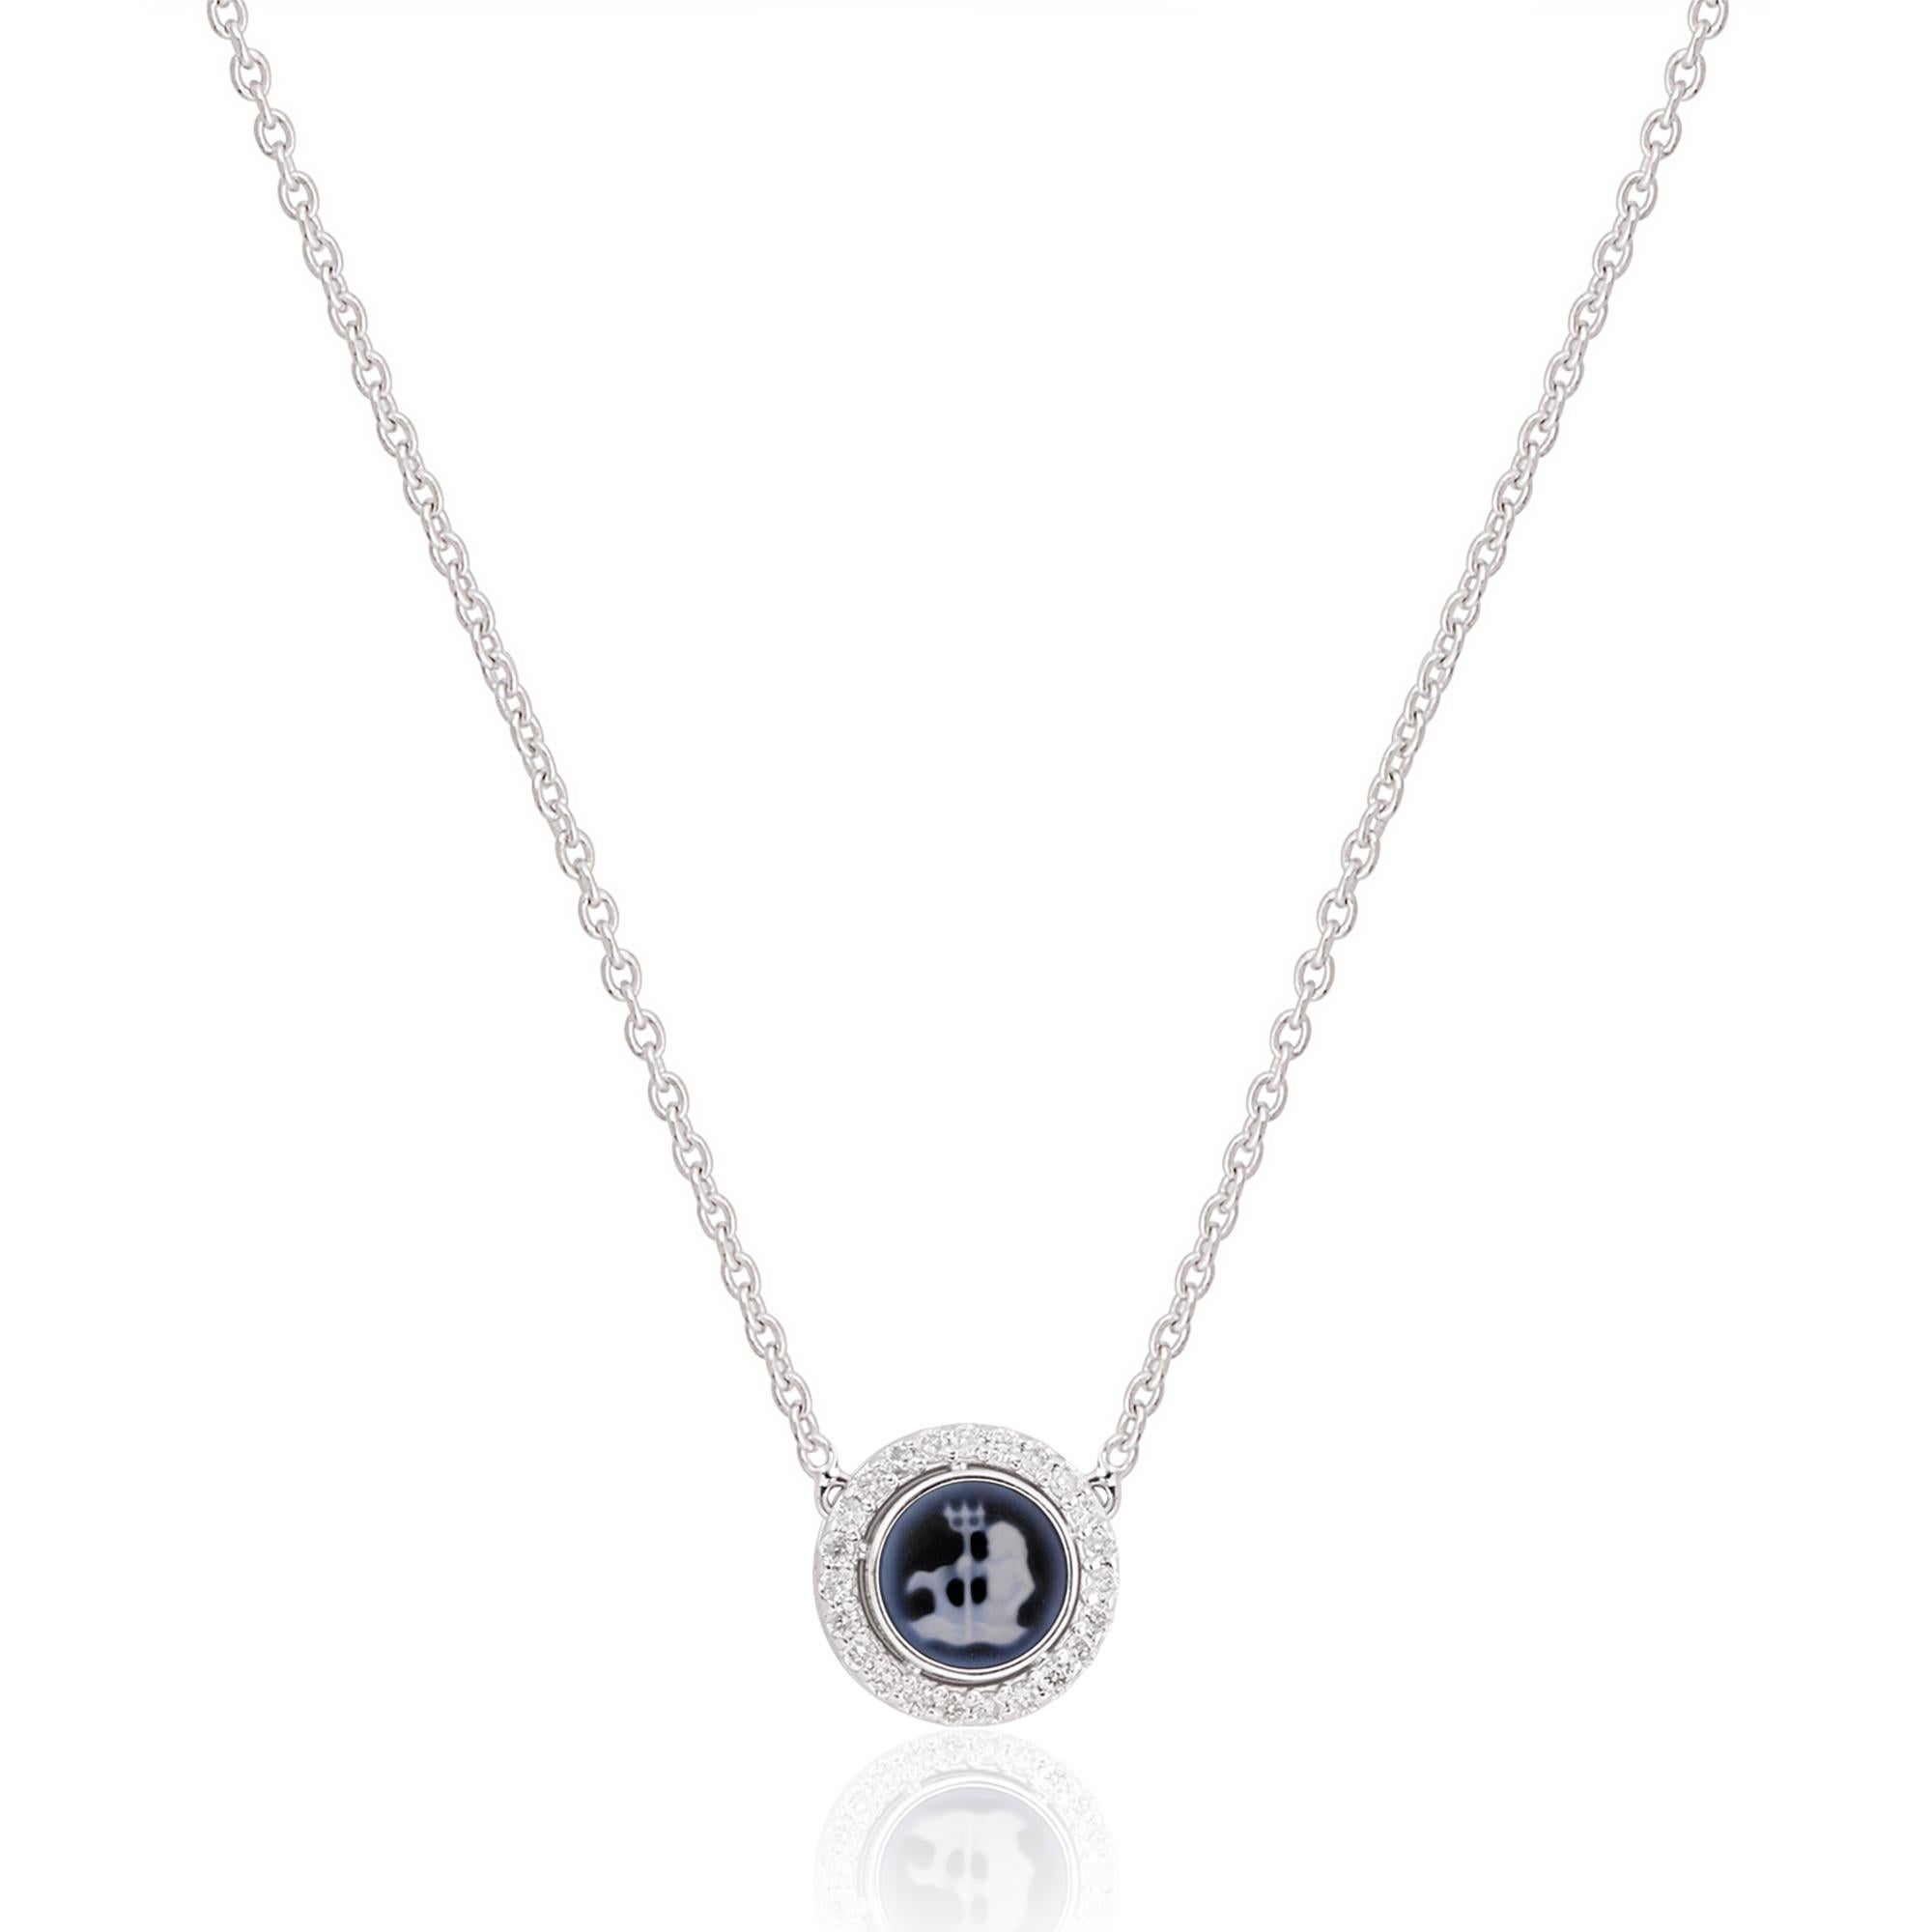 Celebrate your astrological identity with this exquisite Aquarius zodiac sign pendant necklace. With its intricate design, pave diamonds, and 14-karat white gold craftsmanship, it is a stunning representation of individuality and celestial